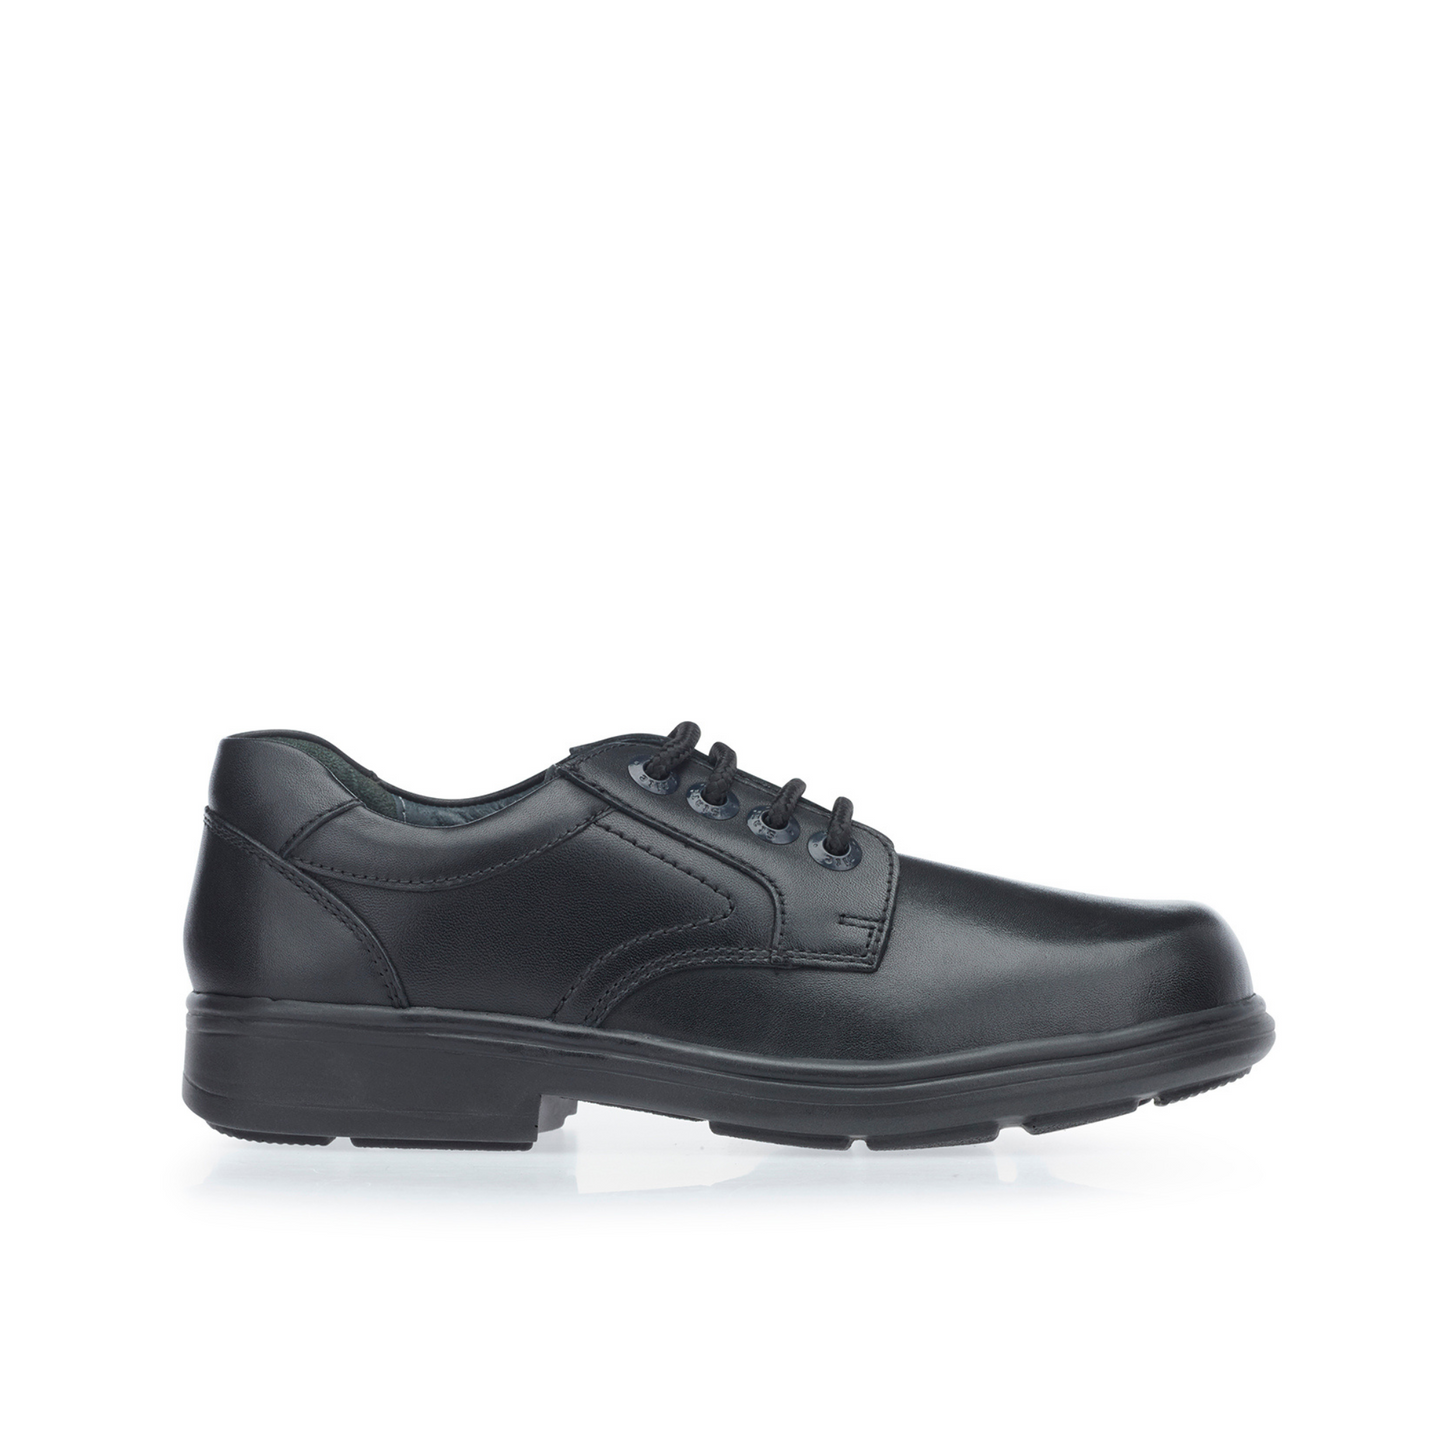 Isaac Black Leather Lace-up Boy’s Shoe